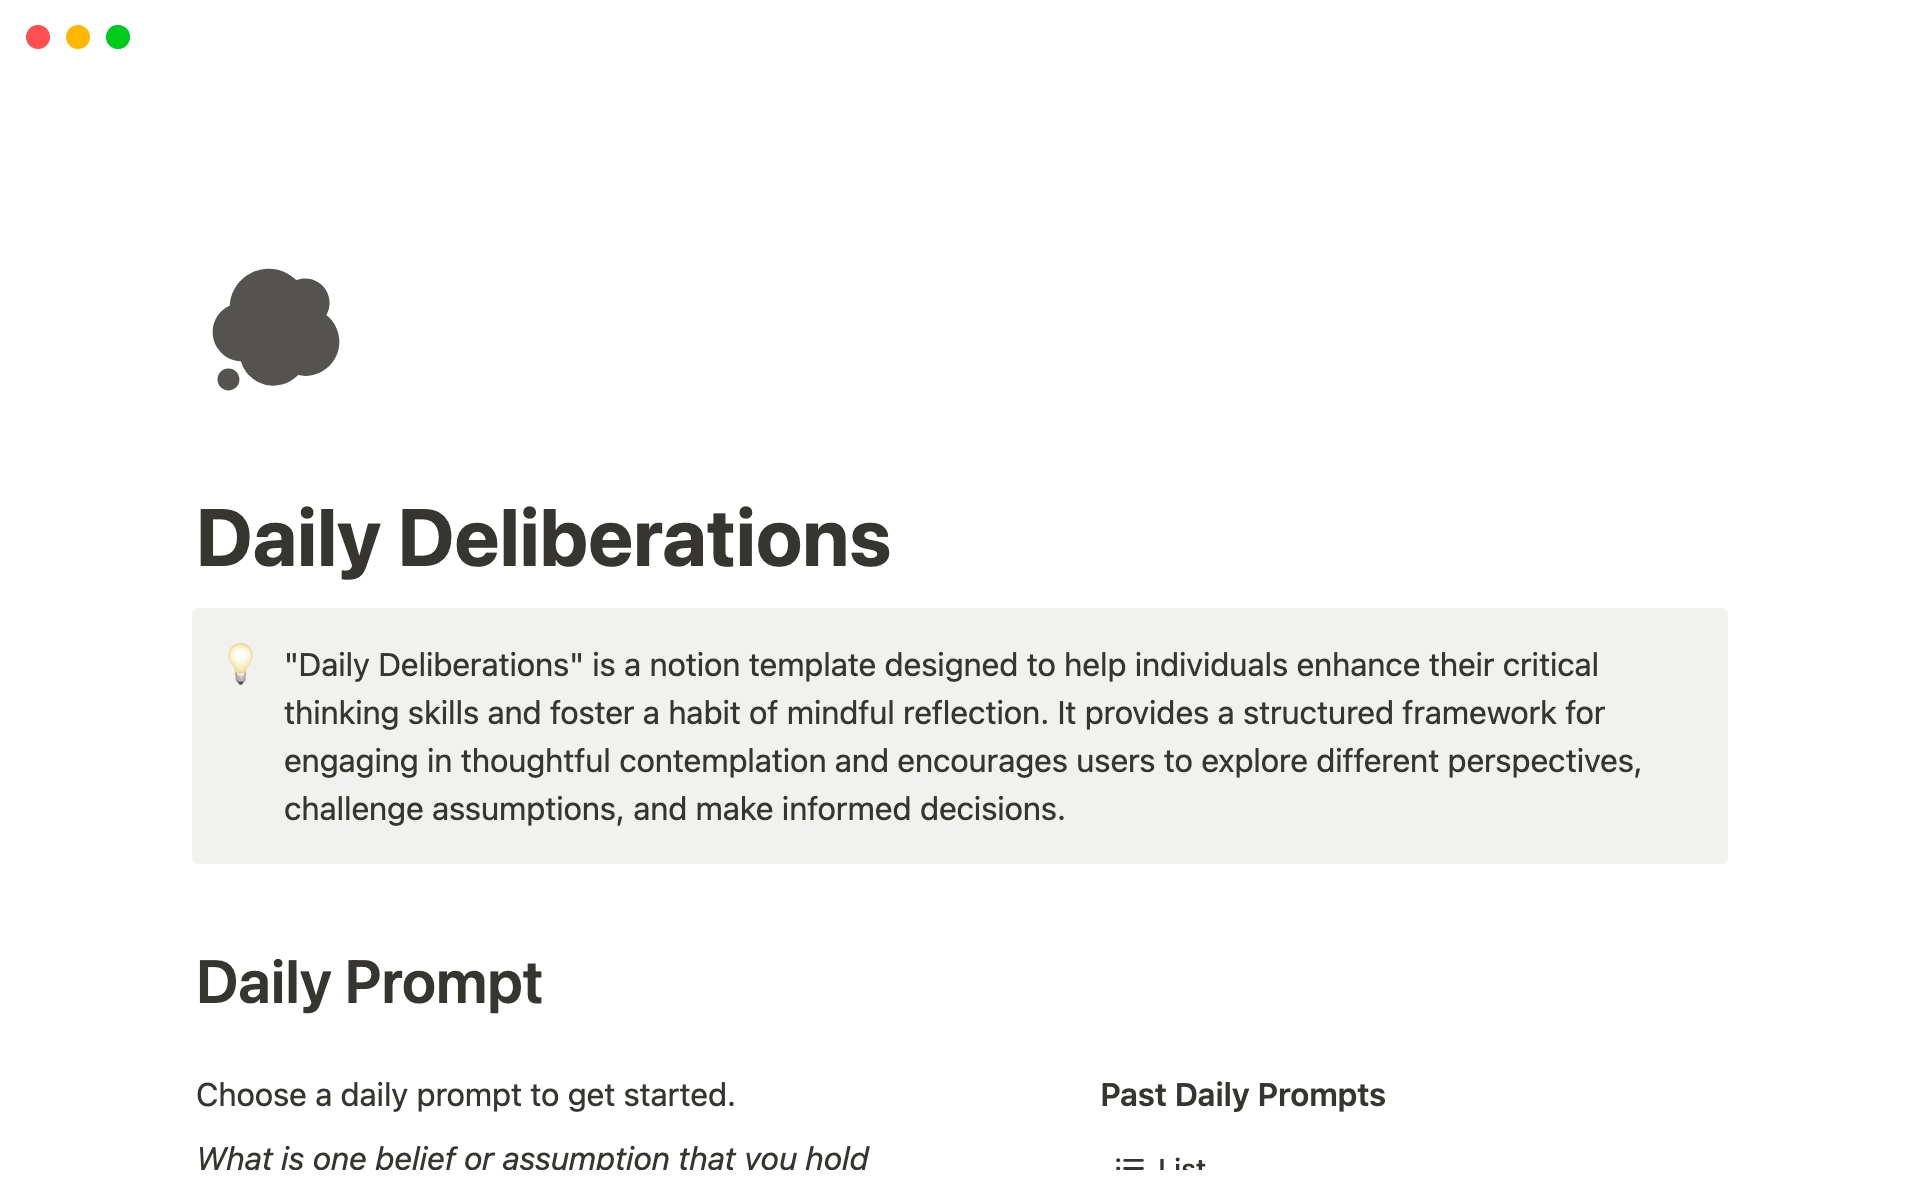 "Daily Deliberations" is a notion template that cultivates critical thinking and mindful reflection by providing a structured framework for exploring perspectives, challenging assumptions, and making informed decisions.